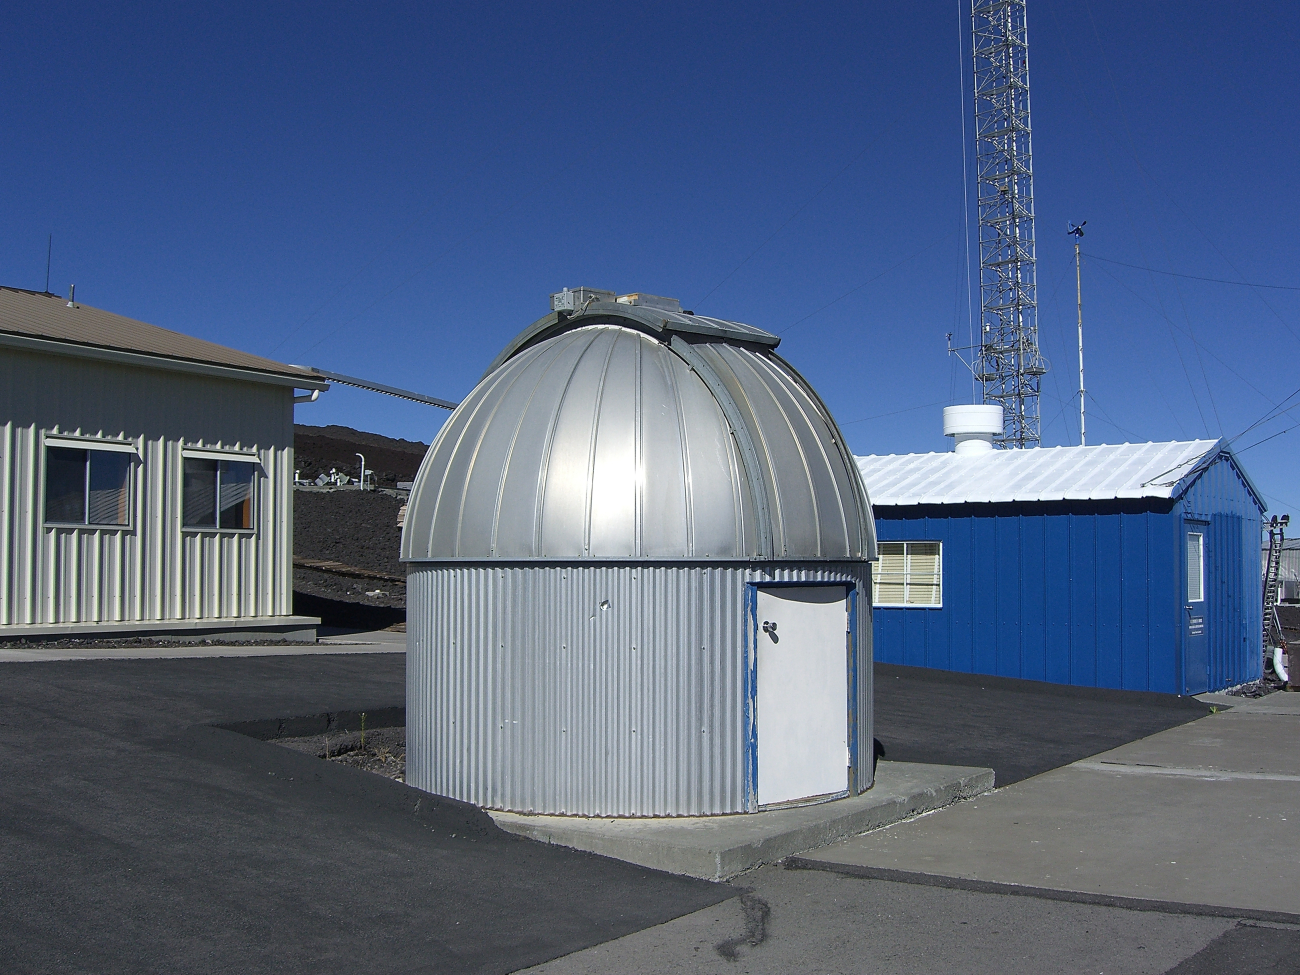 The Dobson spectrophotometer housed inside this dome provides dailymeasurements of the ozone layer